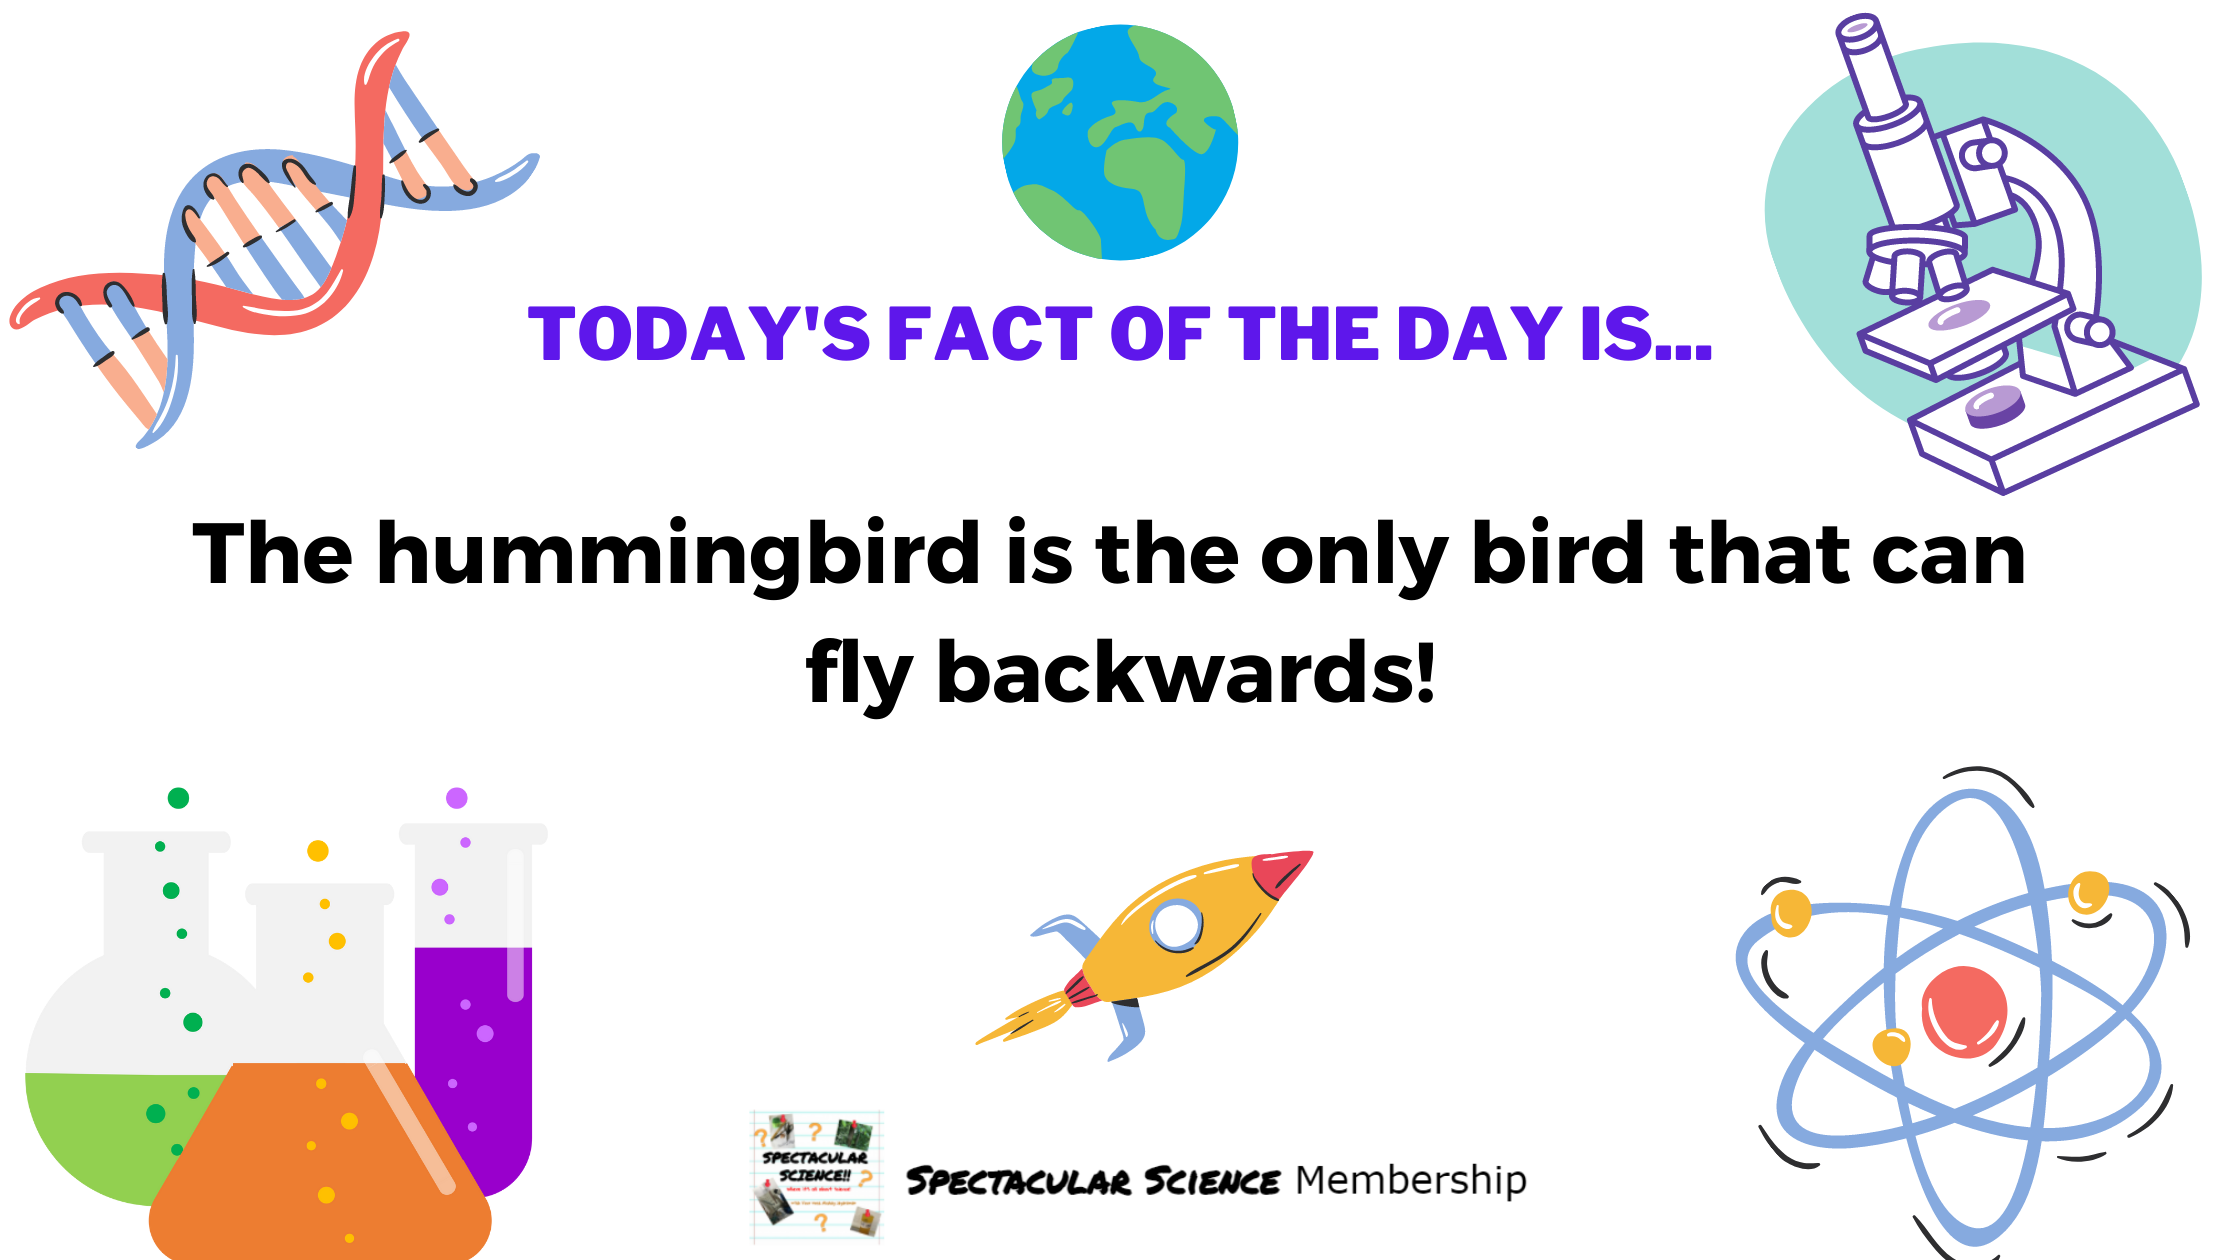 Fact of the Day Image Jan. 13th